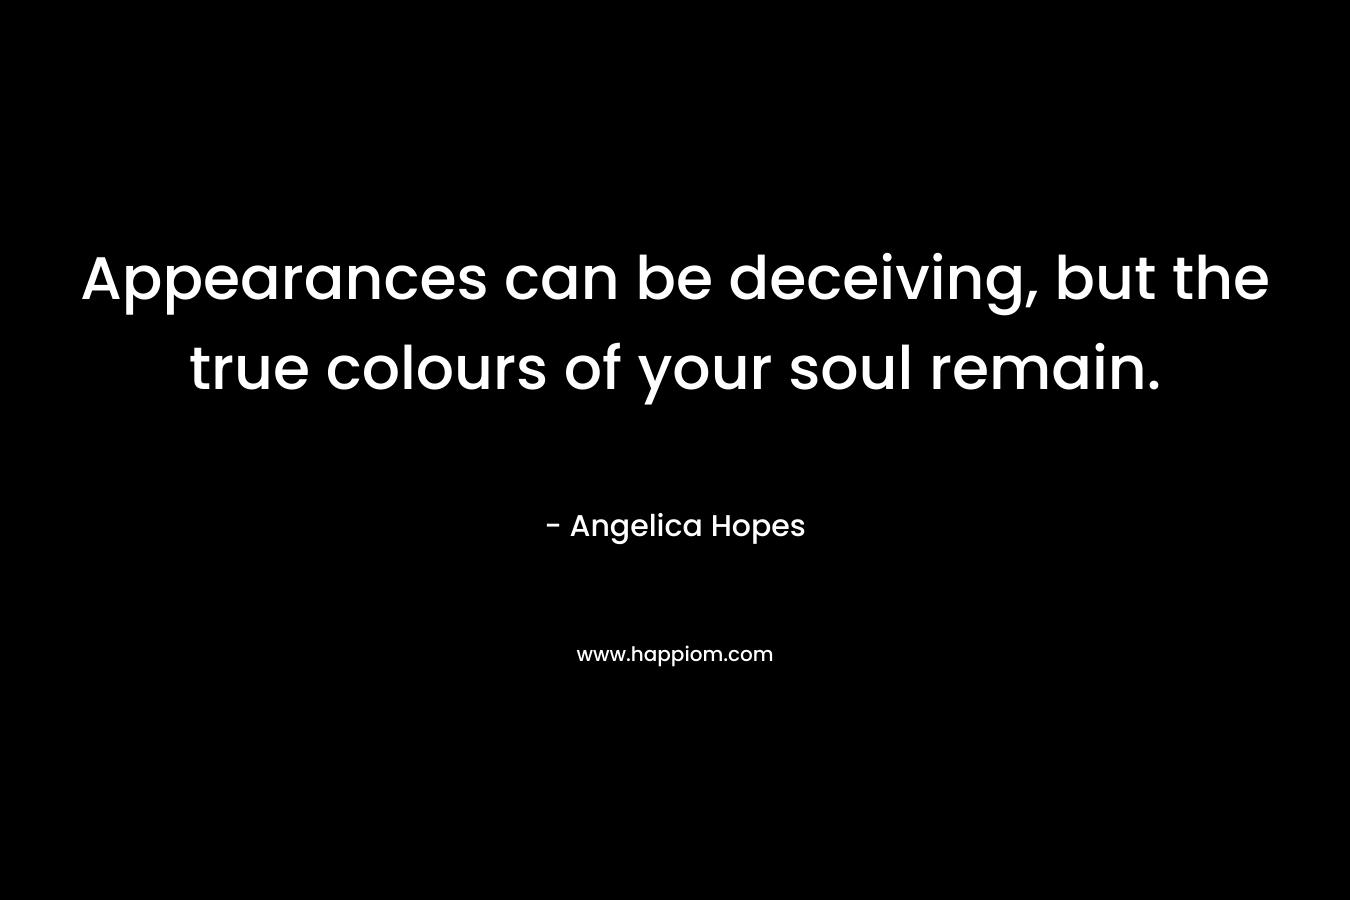 Appearances can be deceiving, but the true colours of your soul remain. – Angelica Hopes